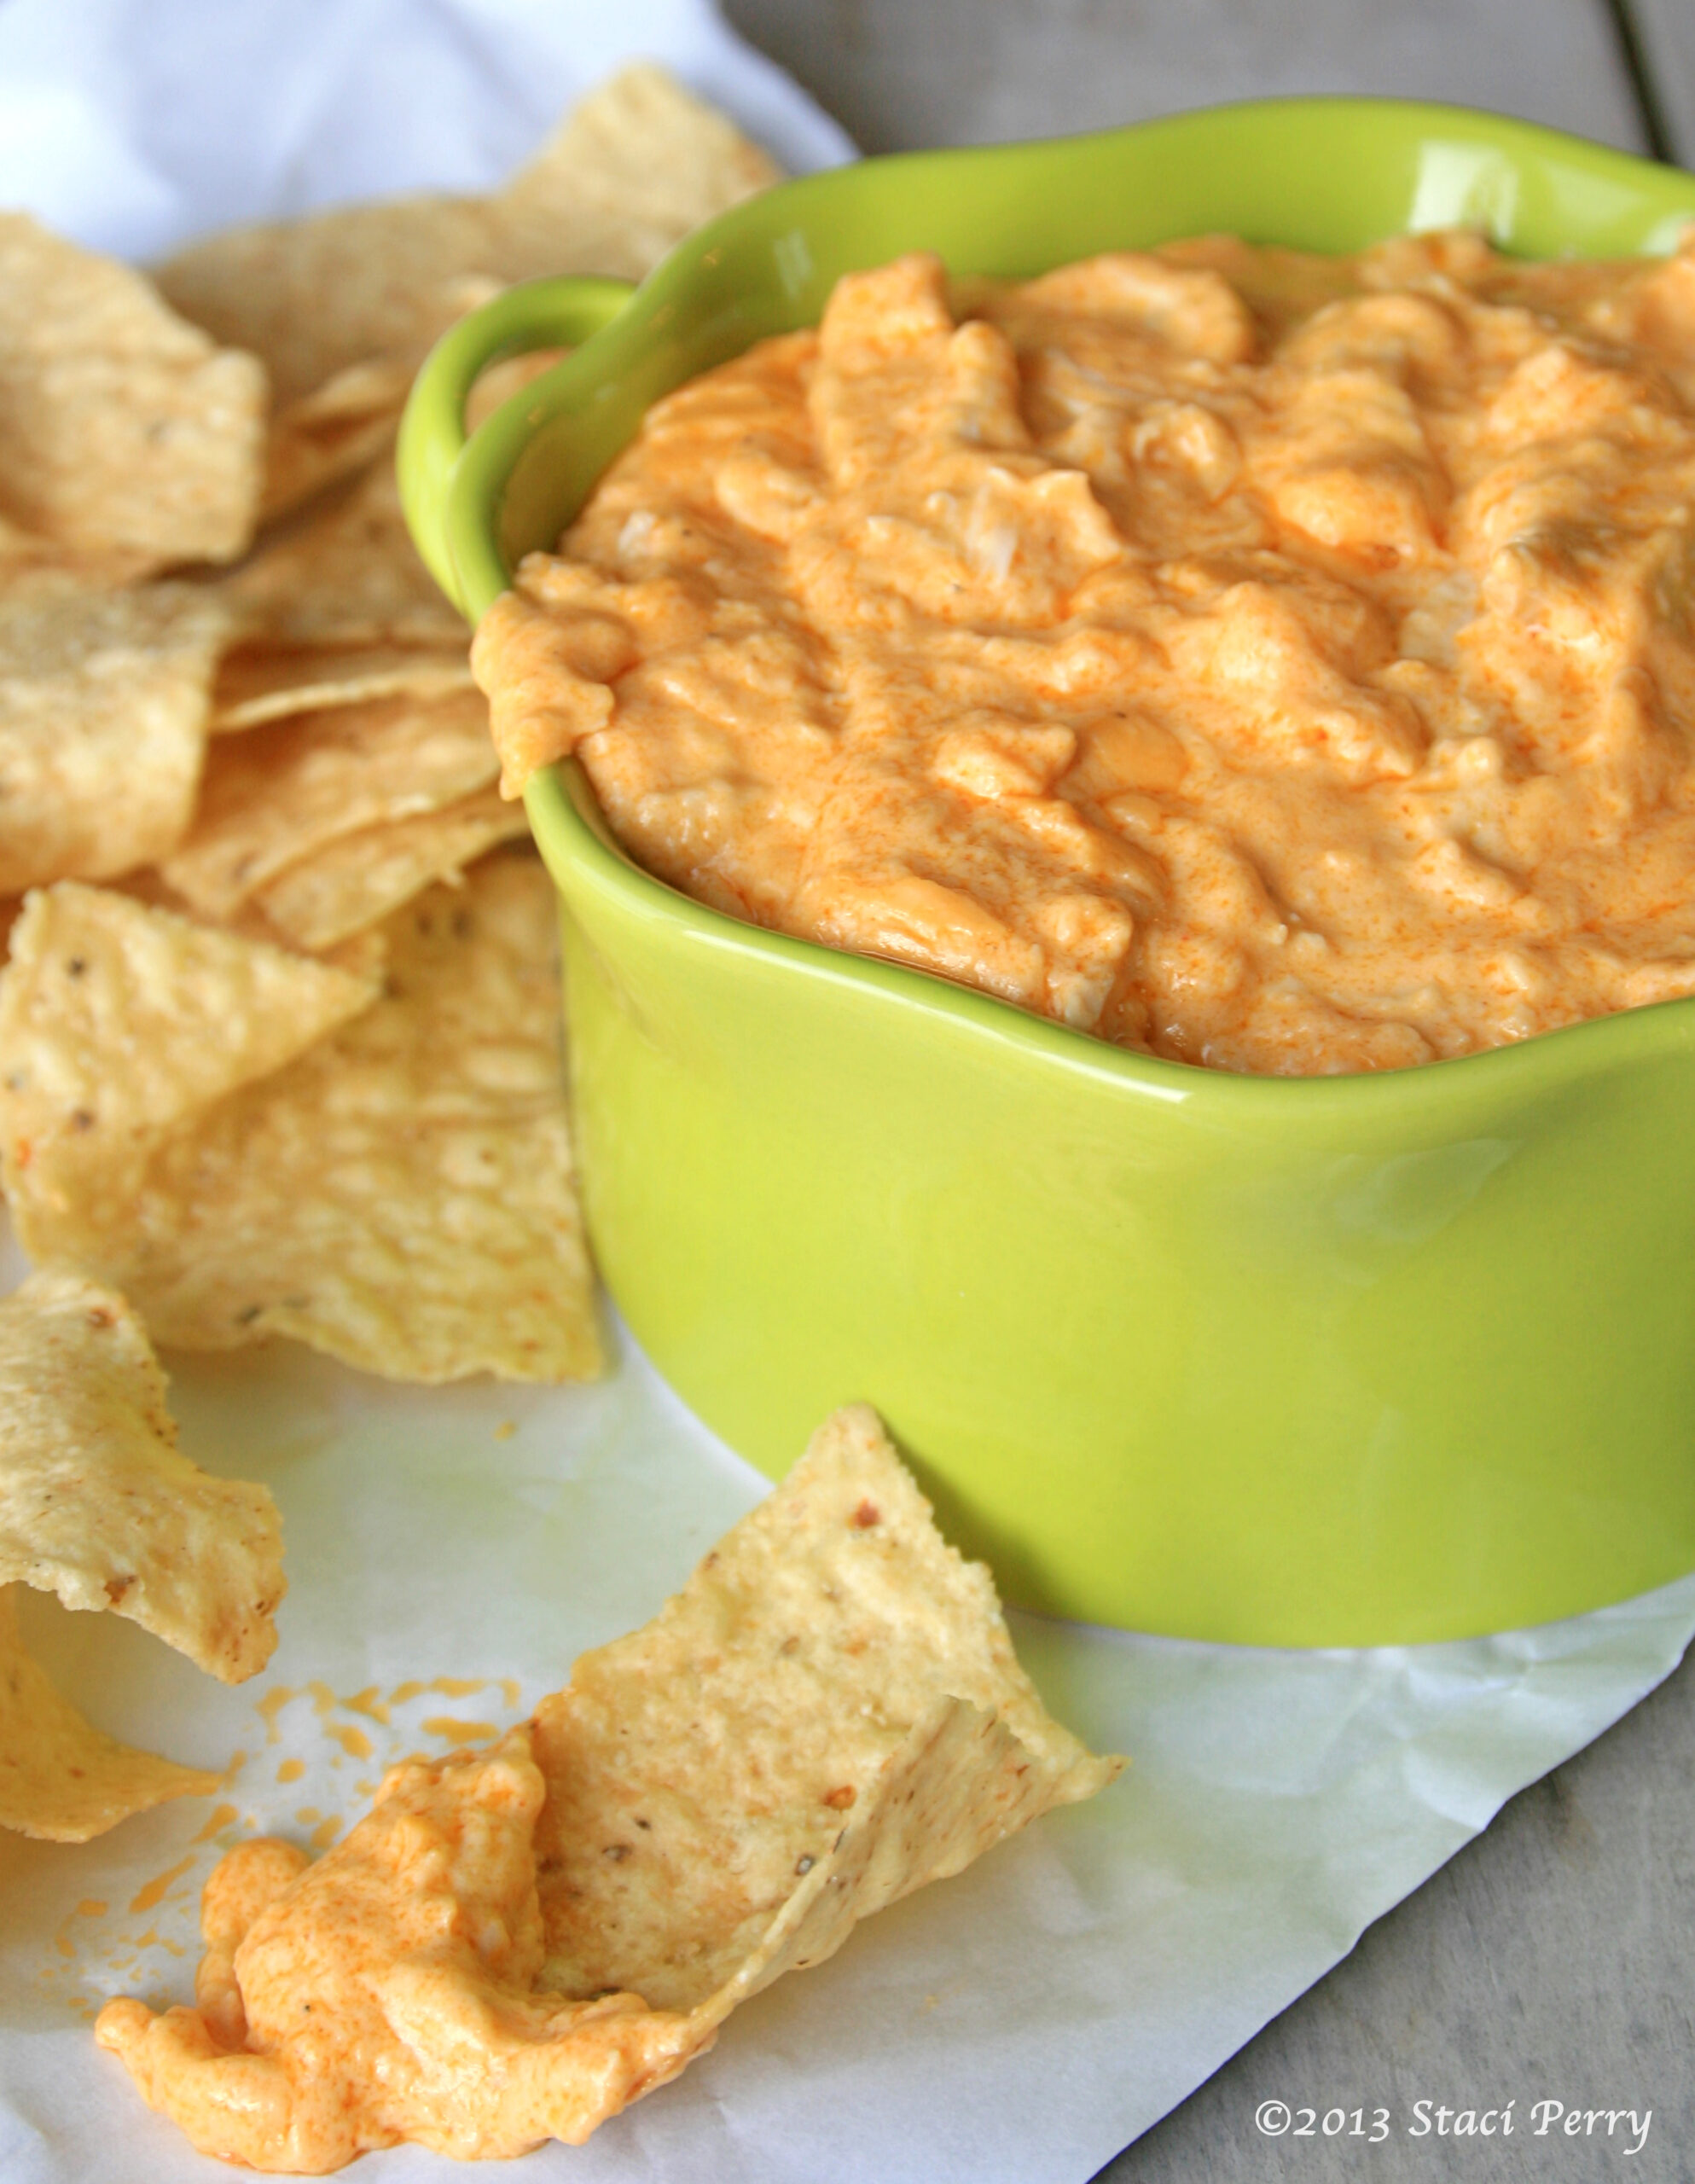 Eat a Super Big Bowl of Buffalo Ranch Chicken Dip While Watching the Football Game